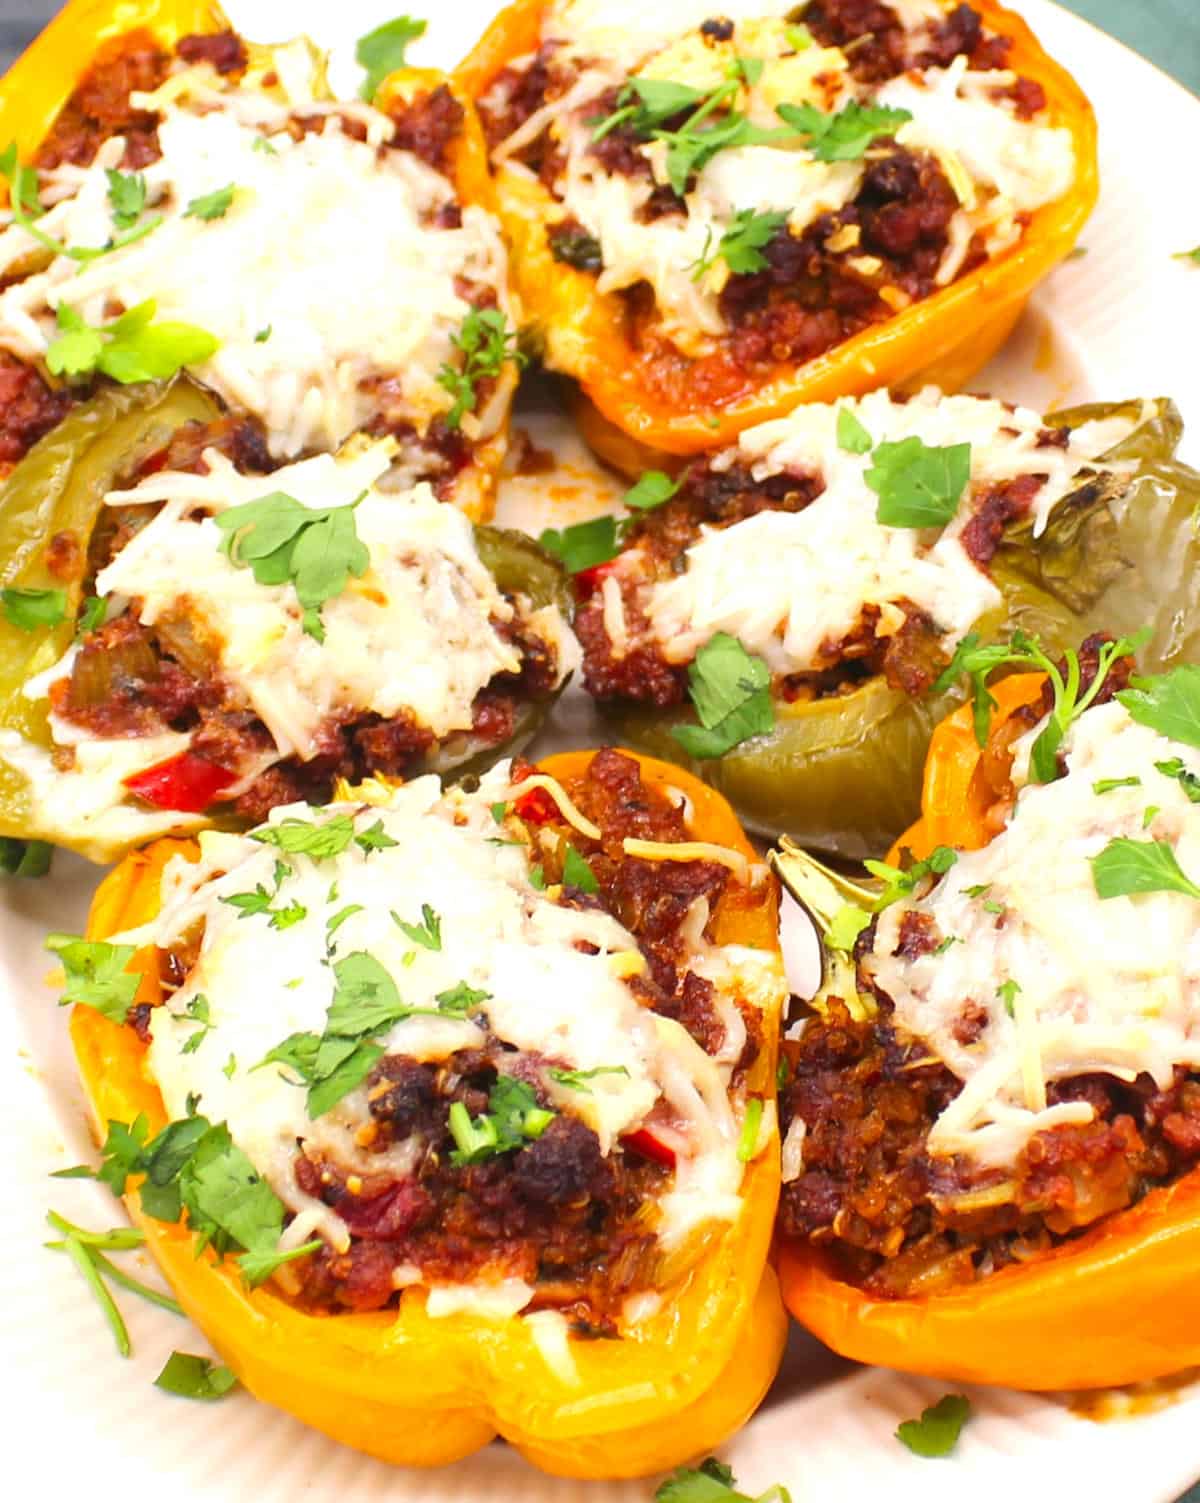 Stuffed bell peppers with a topping of vegan cheese.